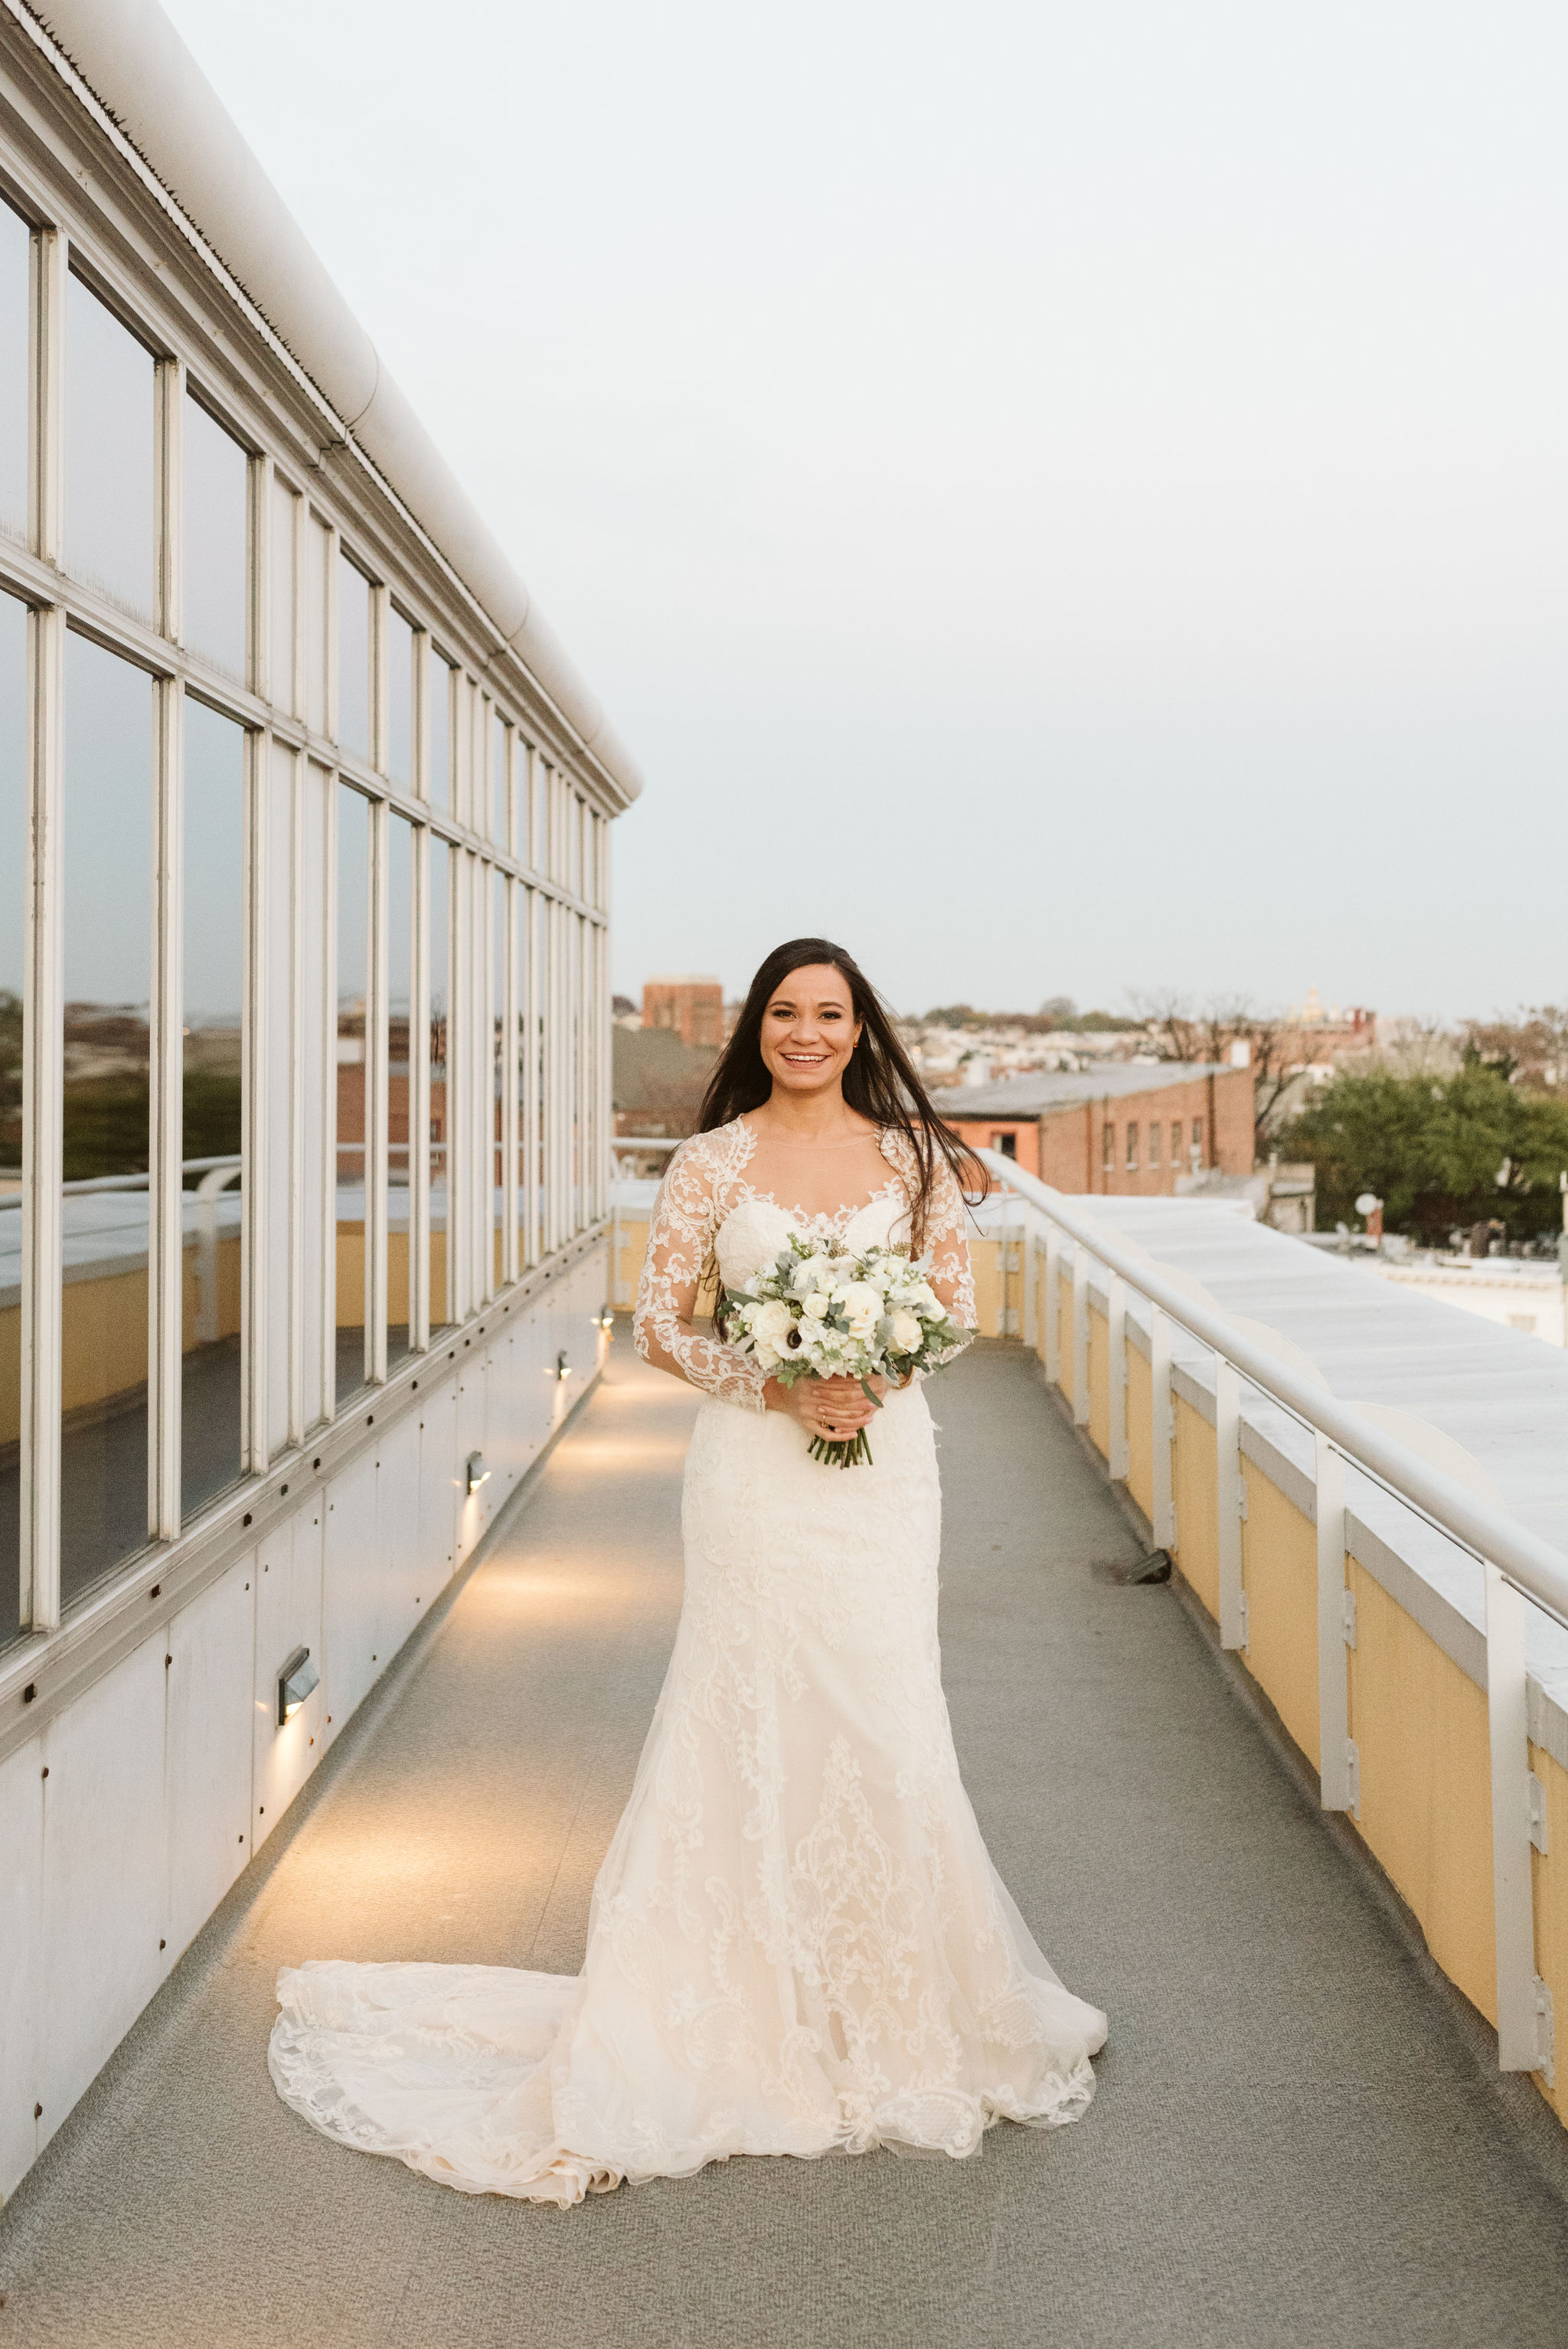  Baltimore, Fells Point, Maryland Wedding Photographer, Winter Wedding, Historic, Classic, Vintage, Portrait of Bride on Rooftop, Beauty by Jacs, Nutmeg Flowers 